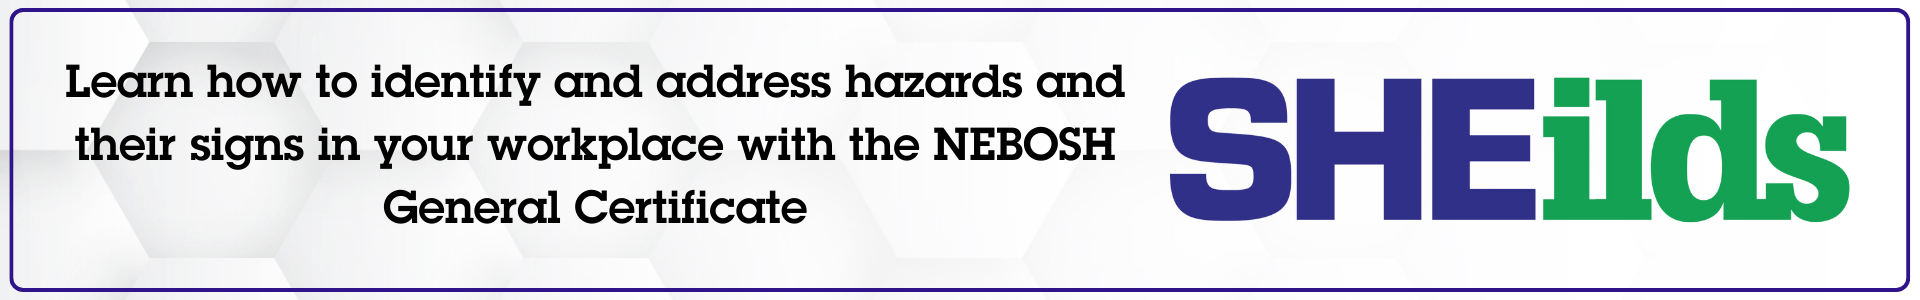 Learn how to identify and address hazards and their signs in your workplace with the NEBOSH General Certificate